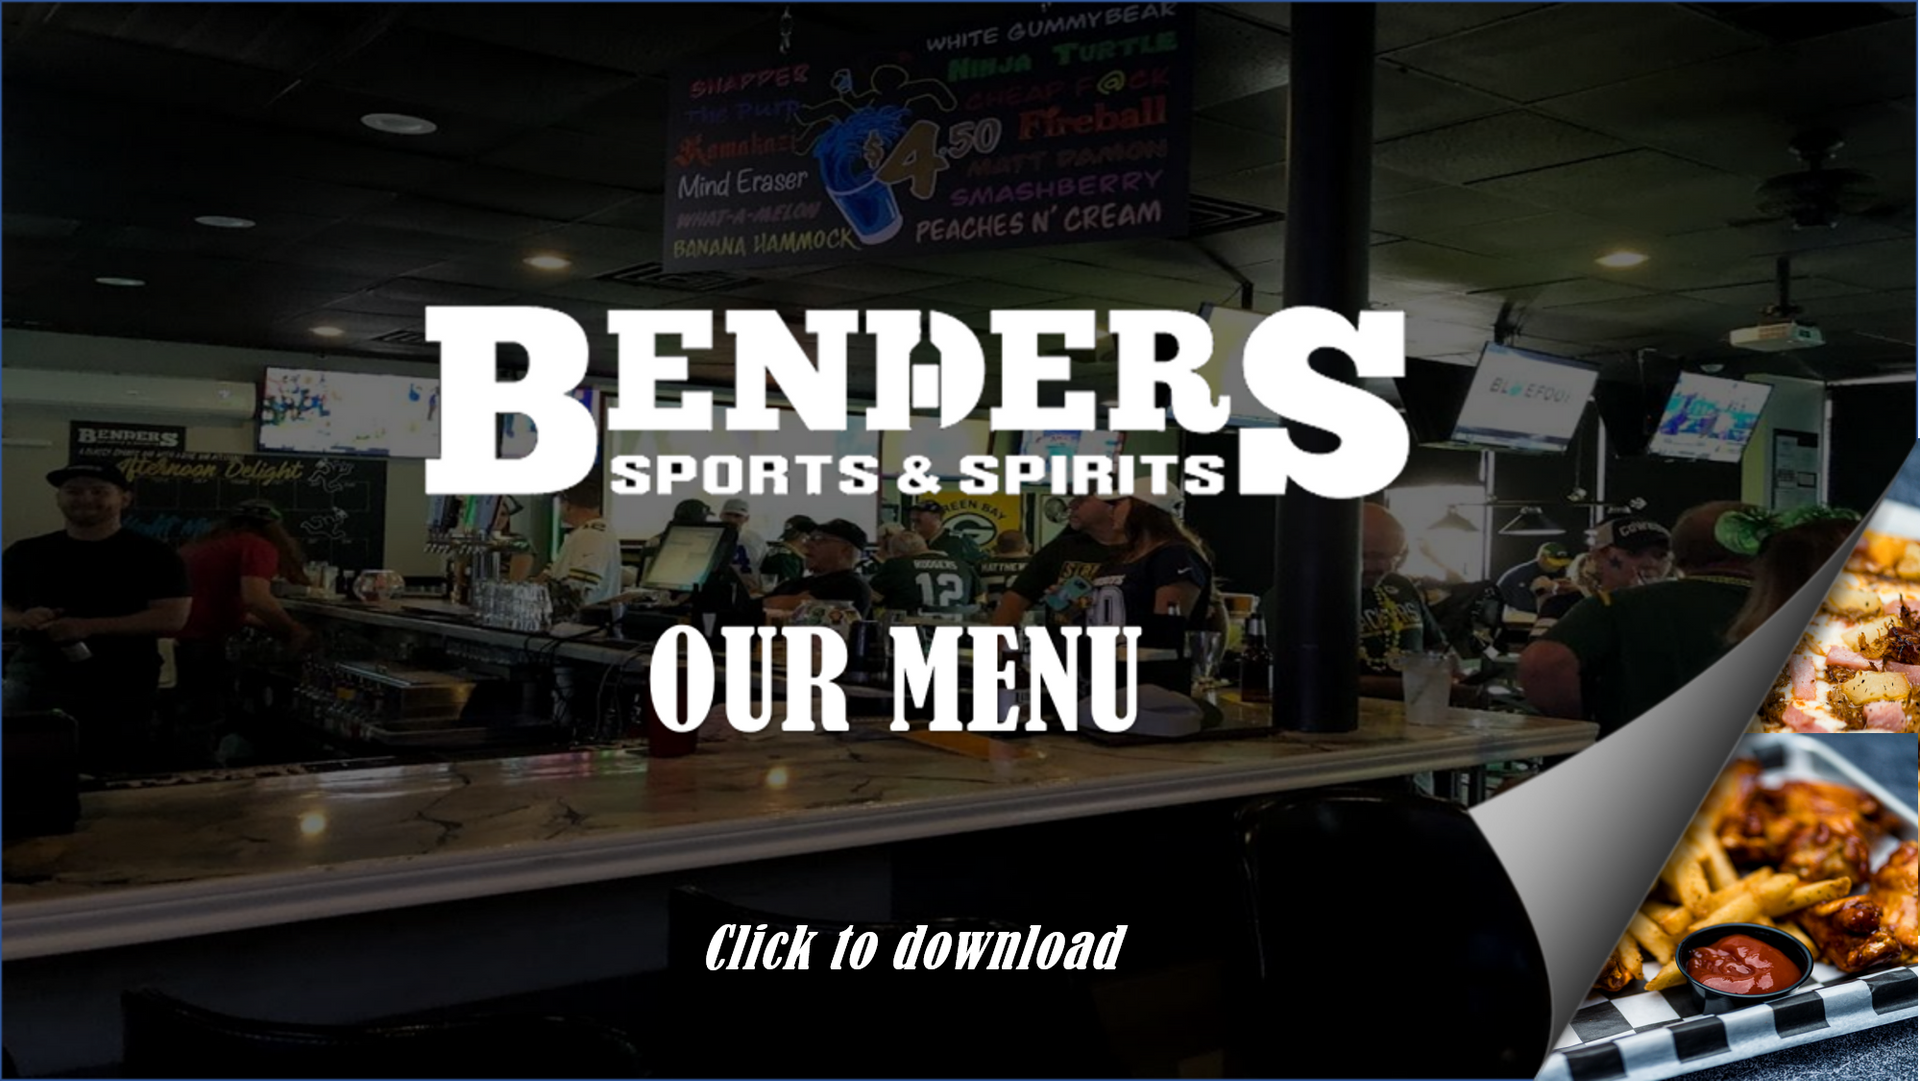 Benders sports and spirits is a restaurant with a menu.